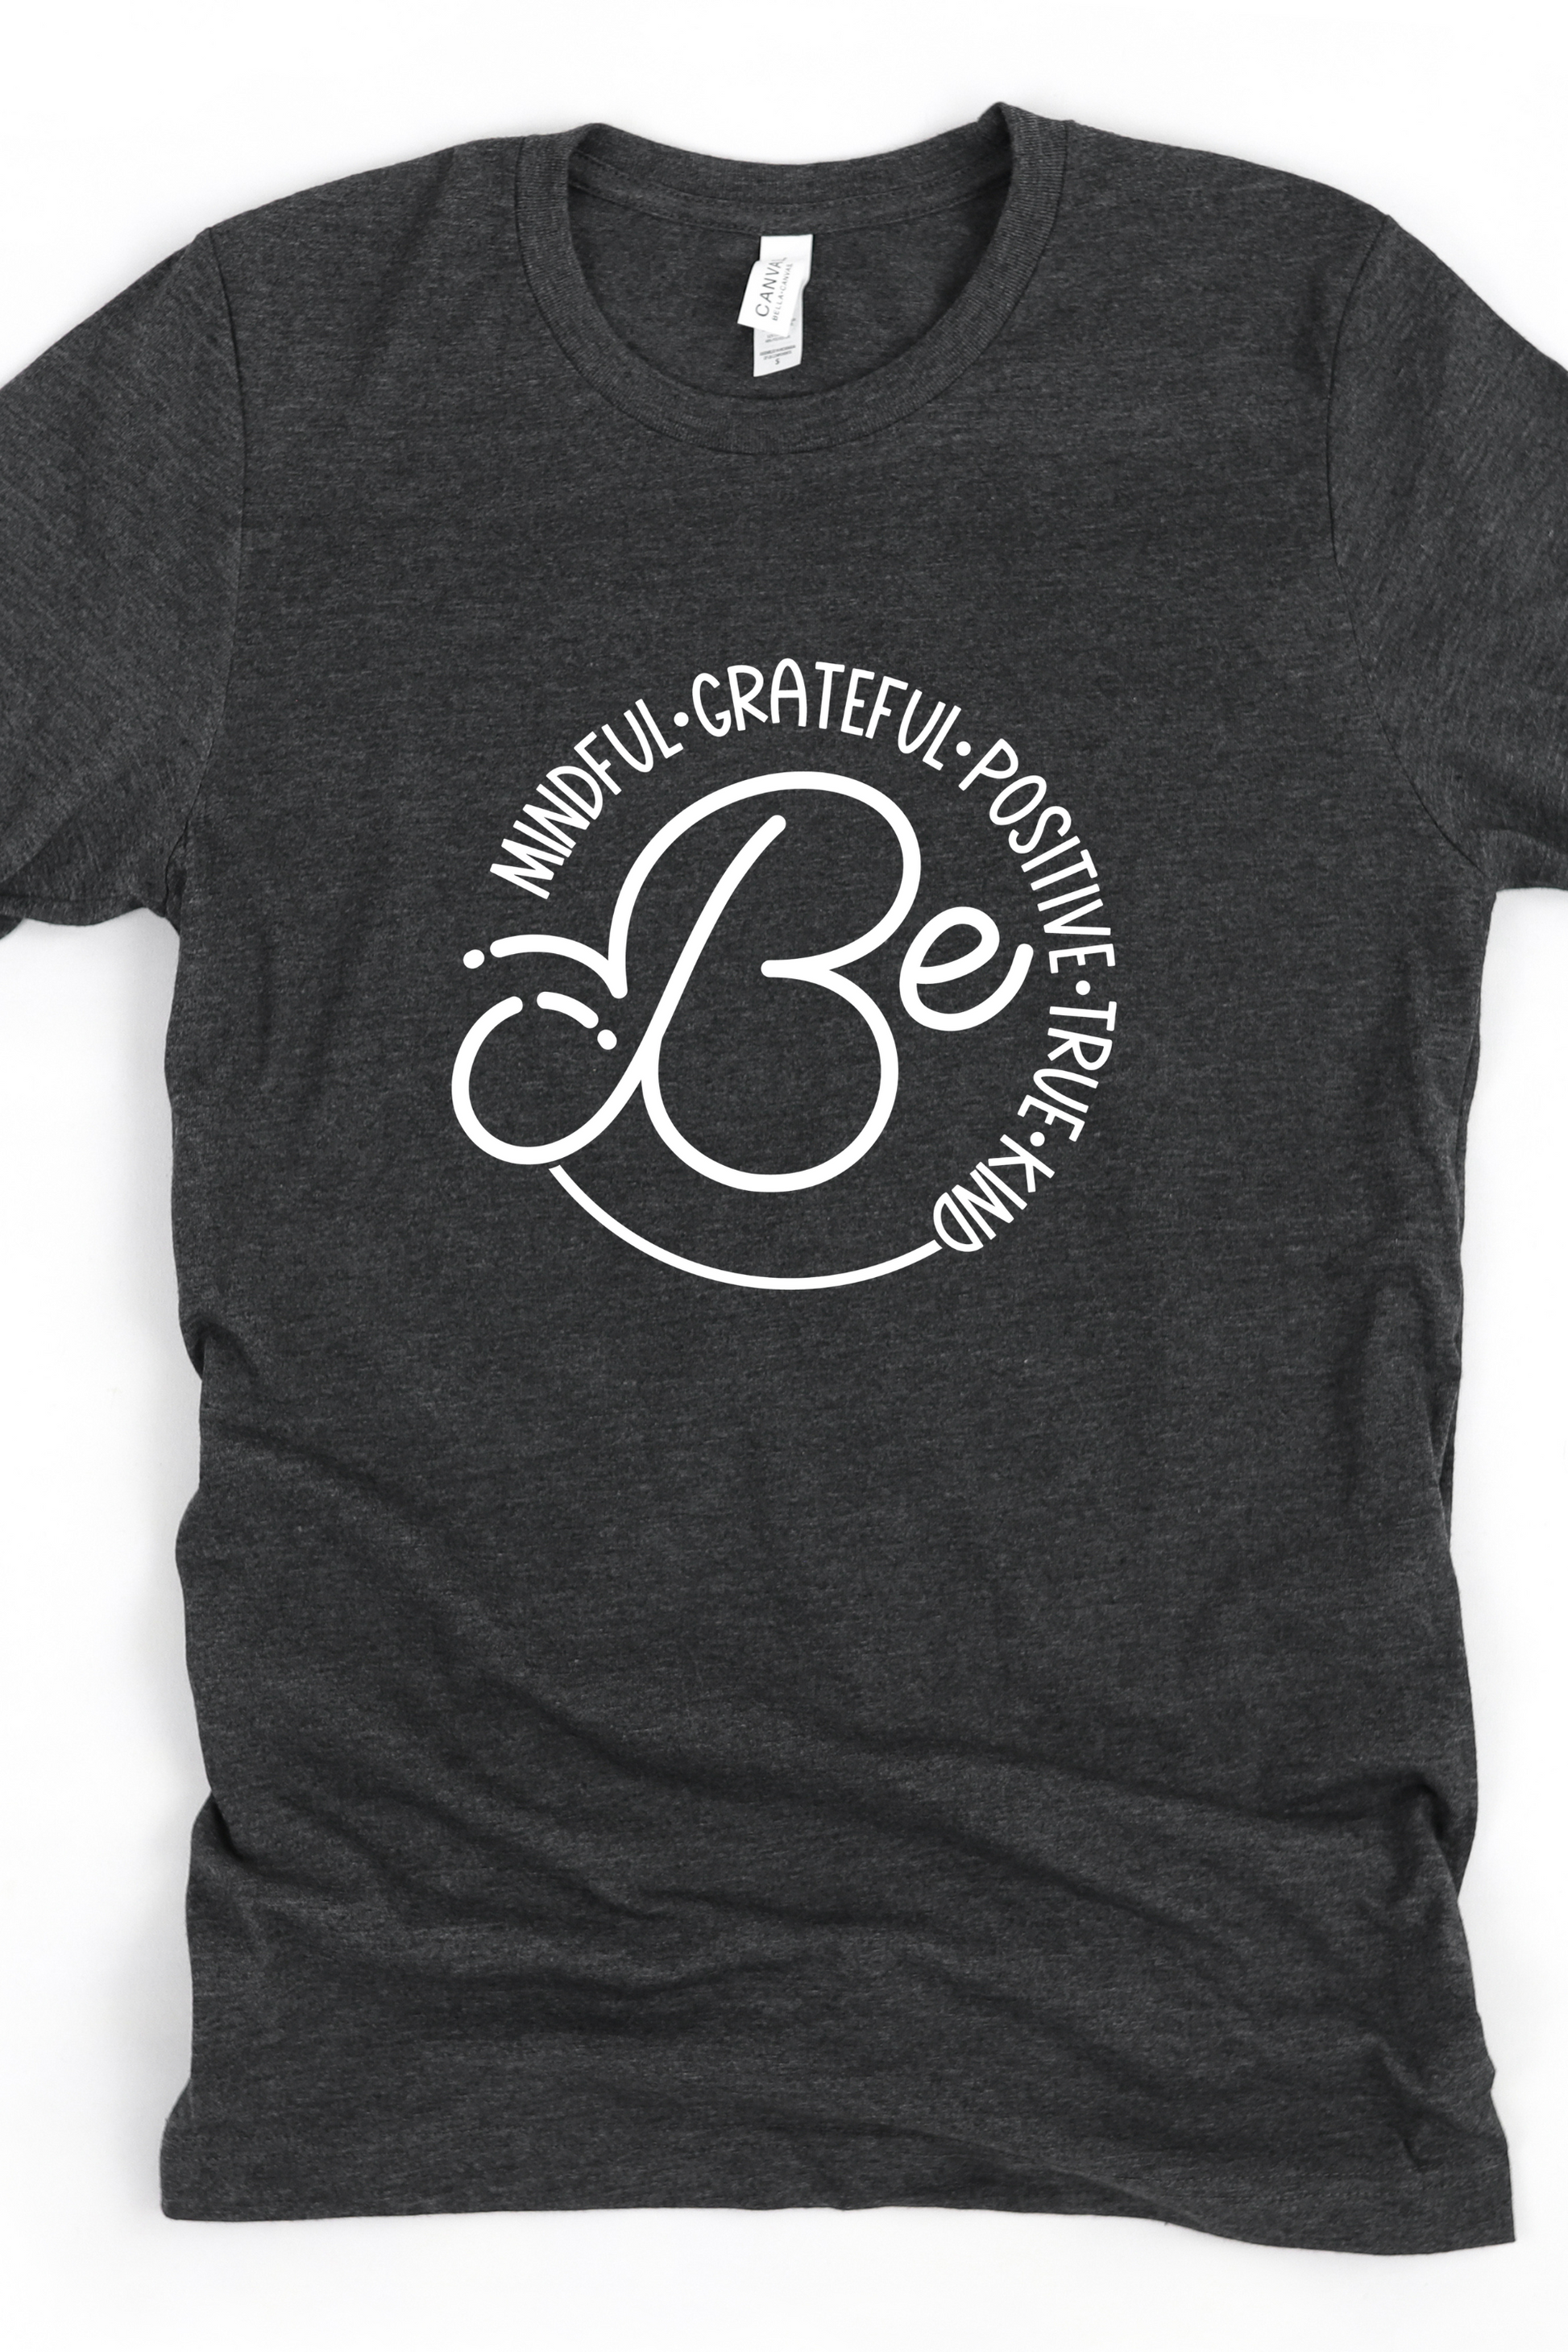 Be Kind Positive Tee Graphic Top - The Magnolia Cottage Boutique